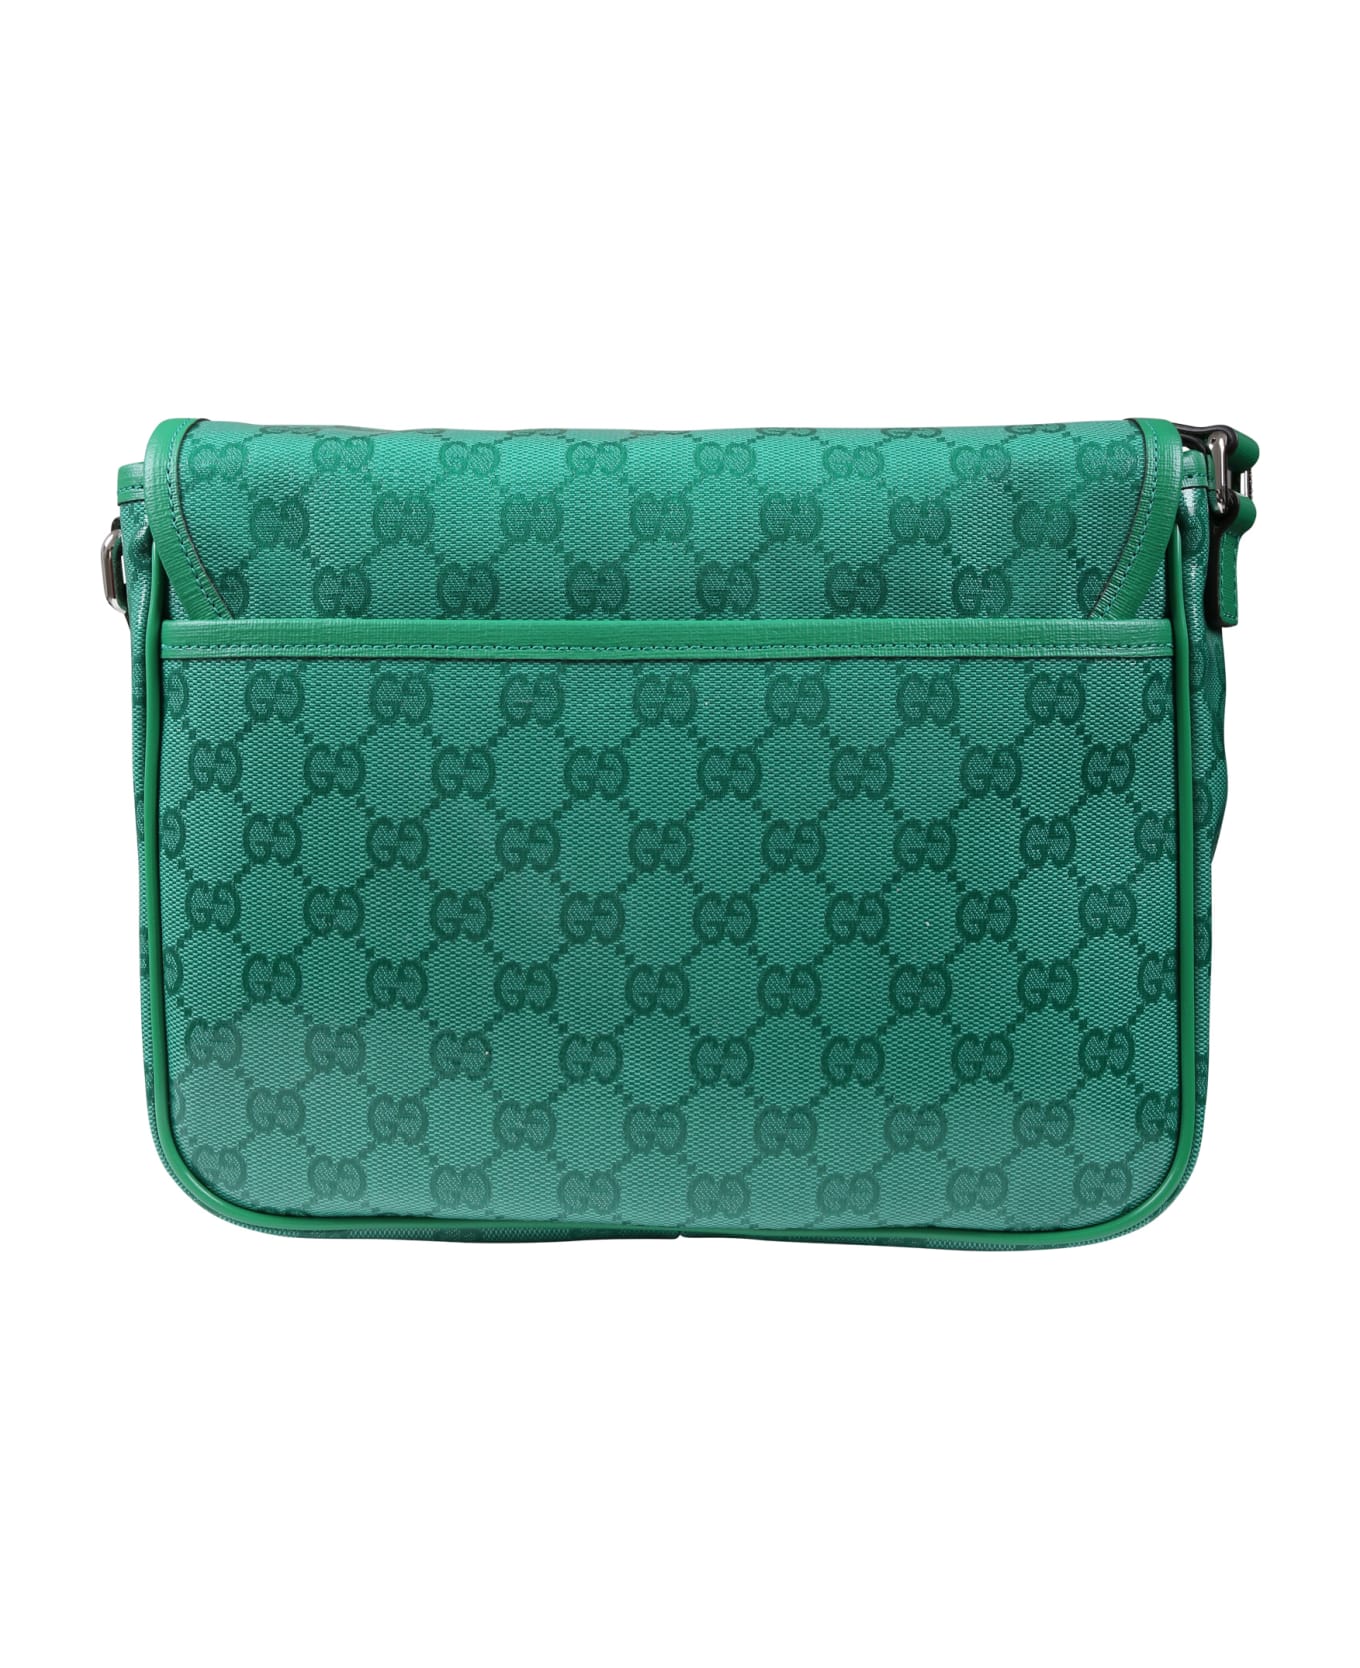 Gucci Green Bag For Girl With Gg Motif - Green アクセサリー＆ギフト